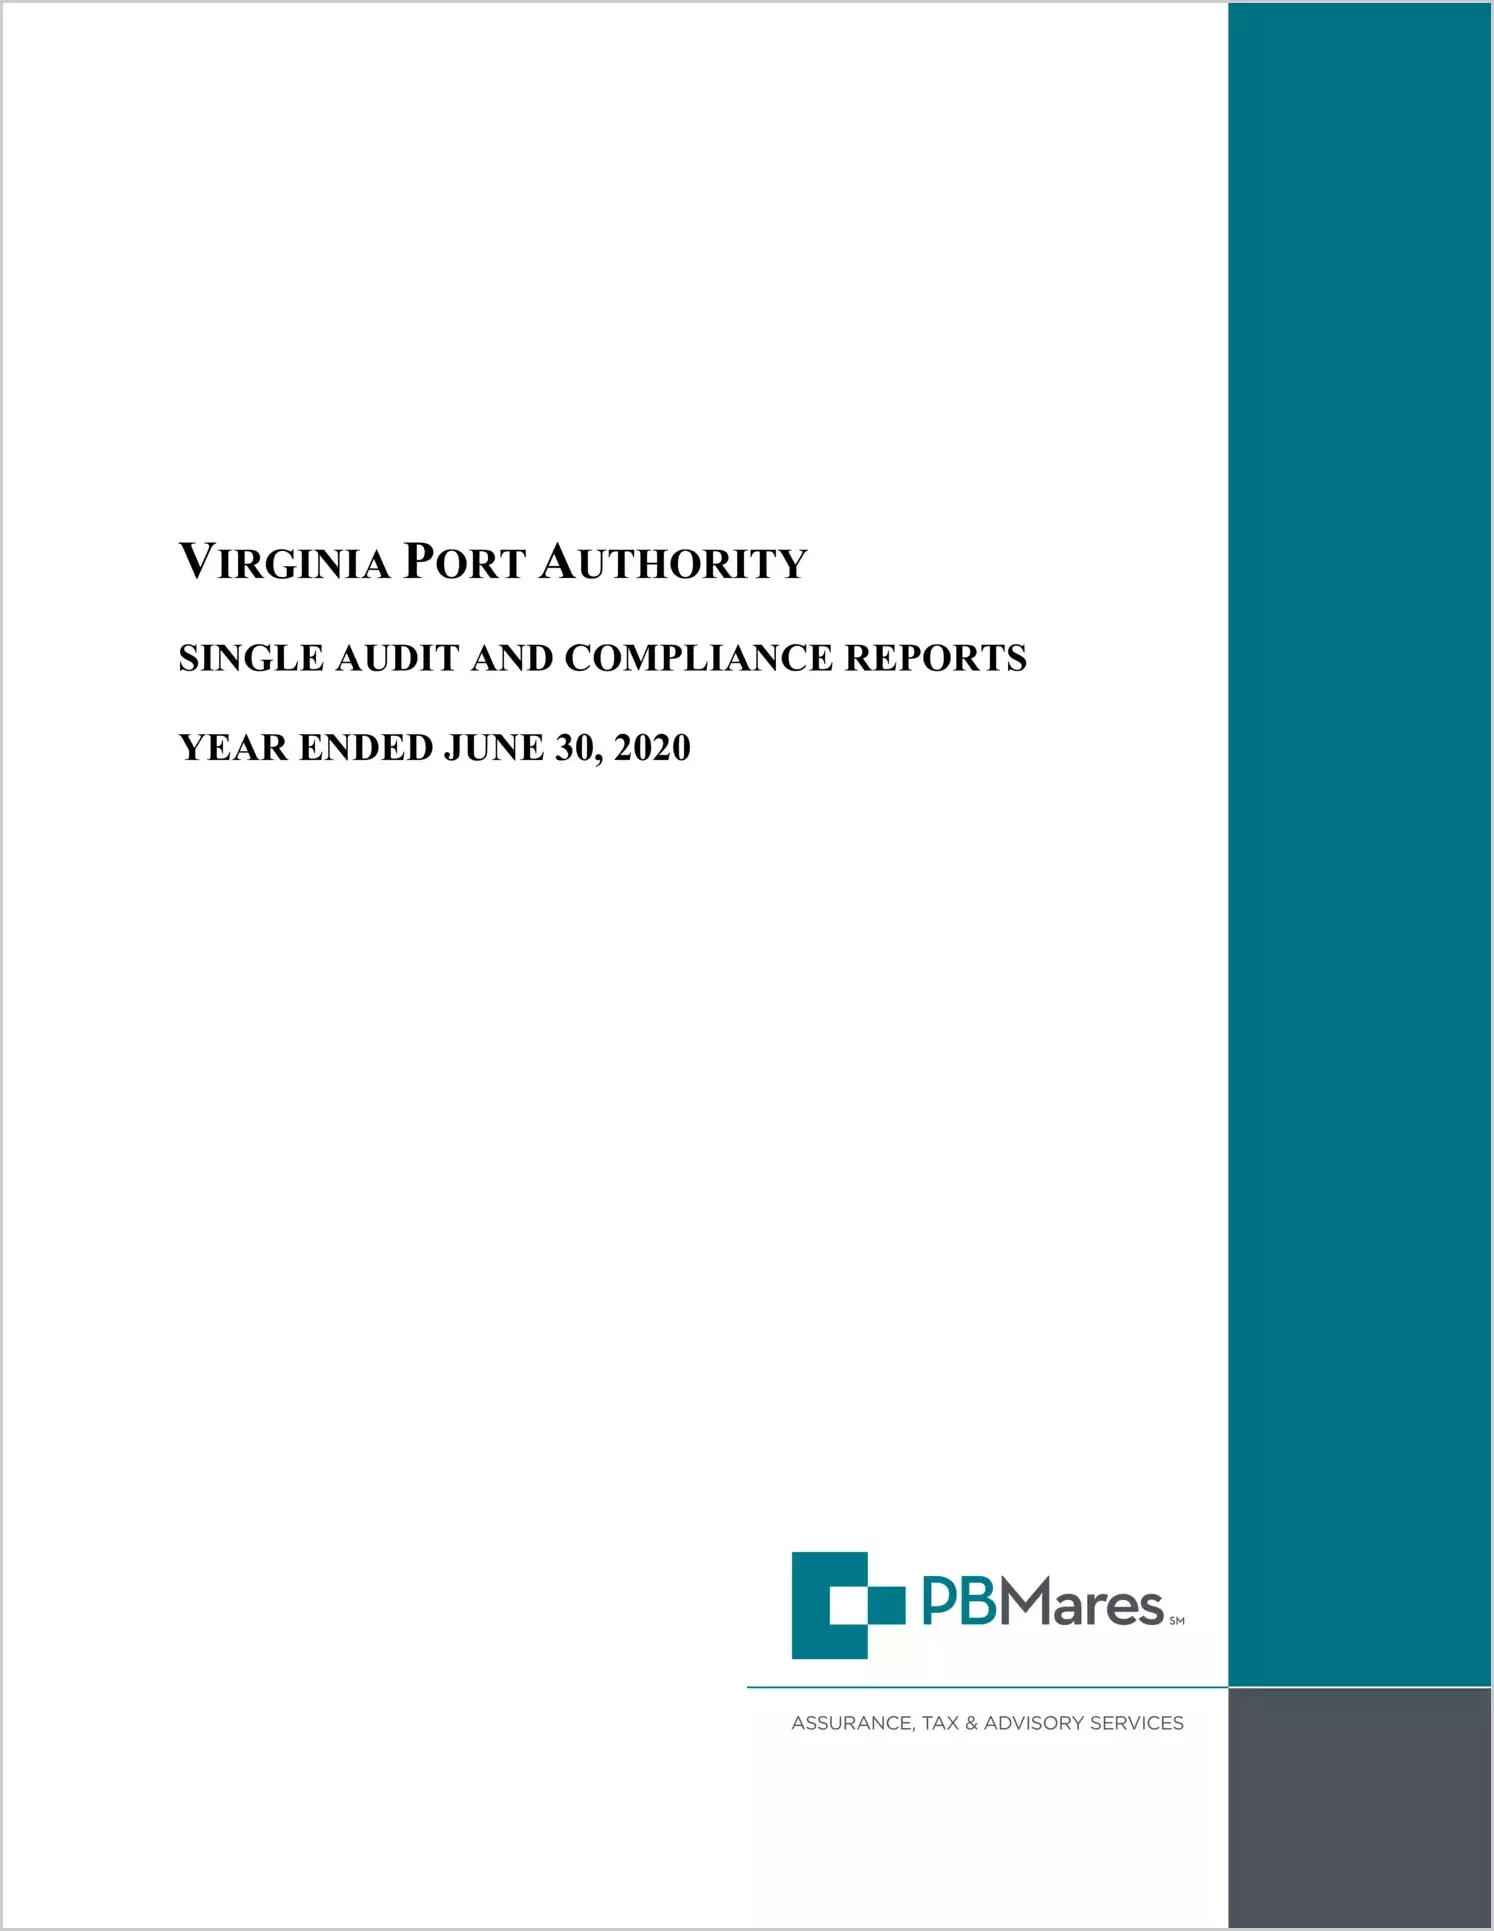 Virginia Port Authority for the year ended June 30, 2020